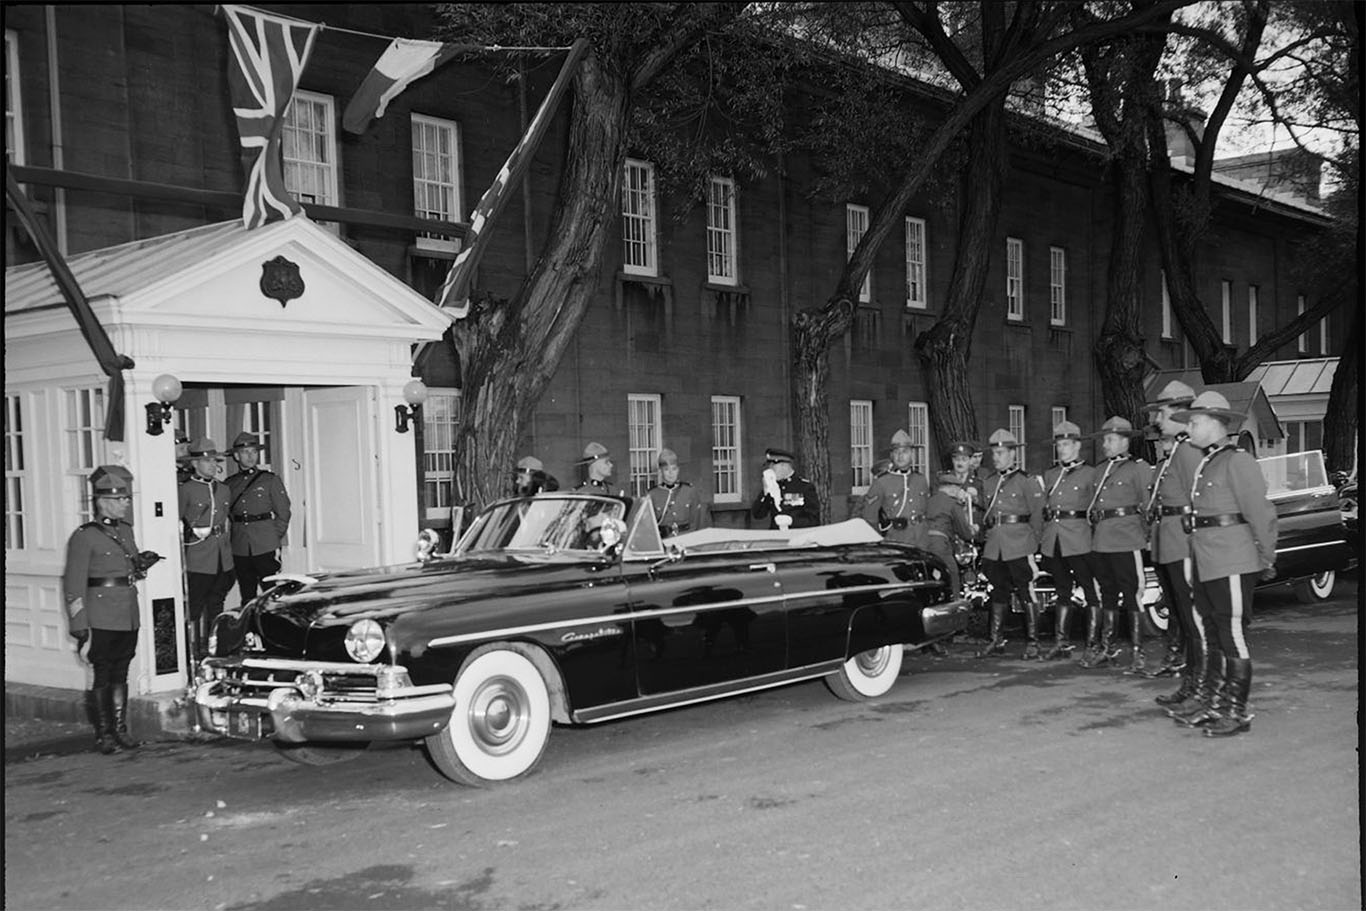 Princess Elizabeth in Front of the Porch of the Residence of the Governor General at the Citadelle, 1951